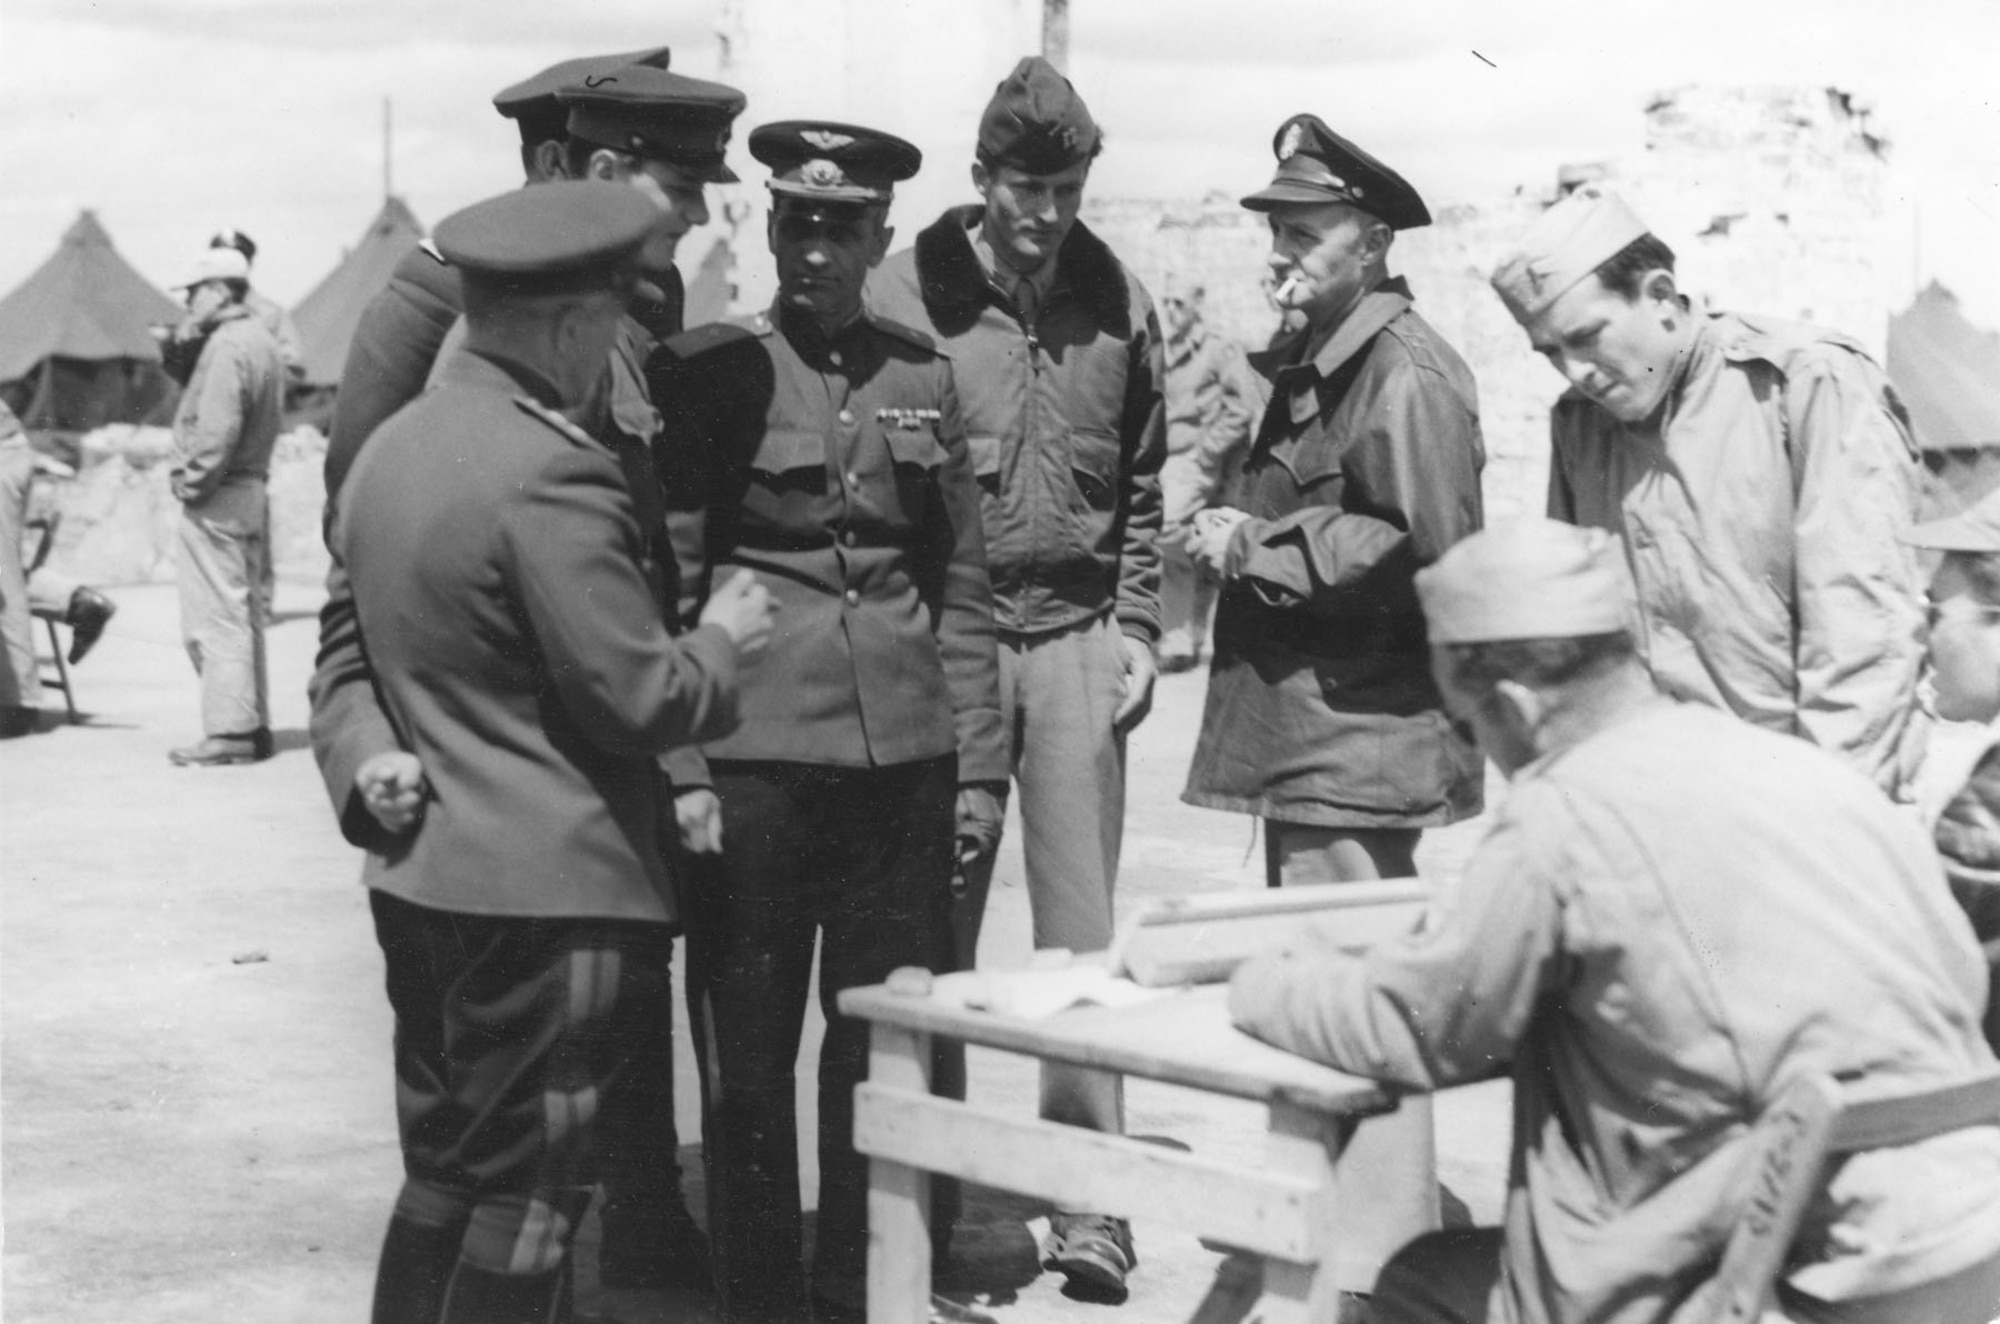 In the ruins of a hangar at Poltava, Gen. Porminov and Gen. Walsh listen to a pilot's report after the mission to Galati. The officer in the center is Capt. Henry Ware, interpreter from Gen. Deane’s staff. (U.S. Air Force photo)